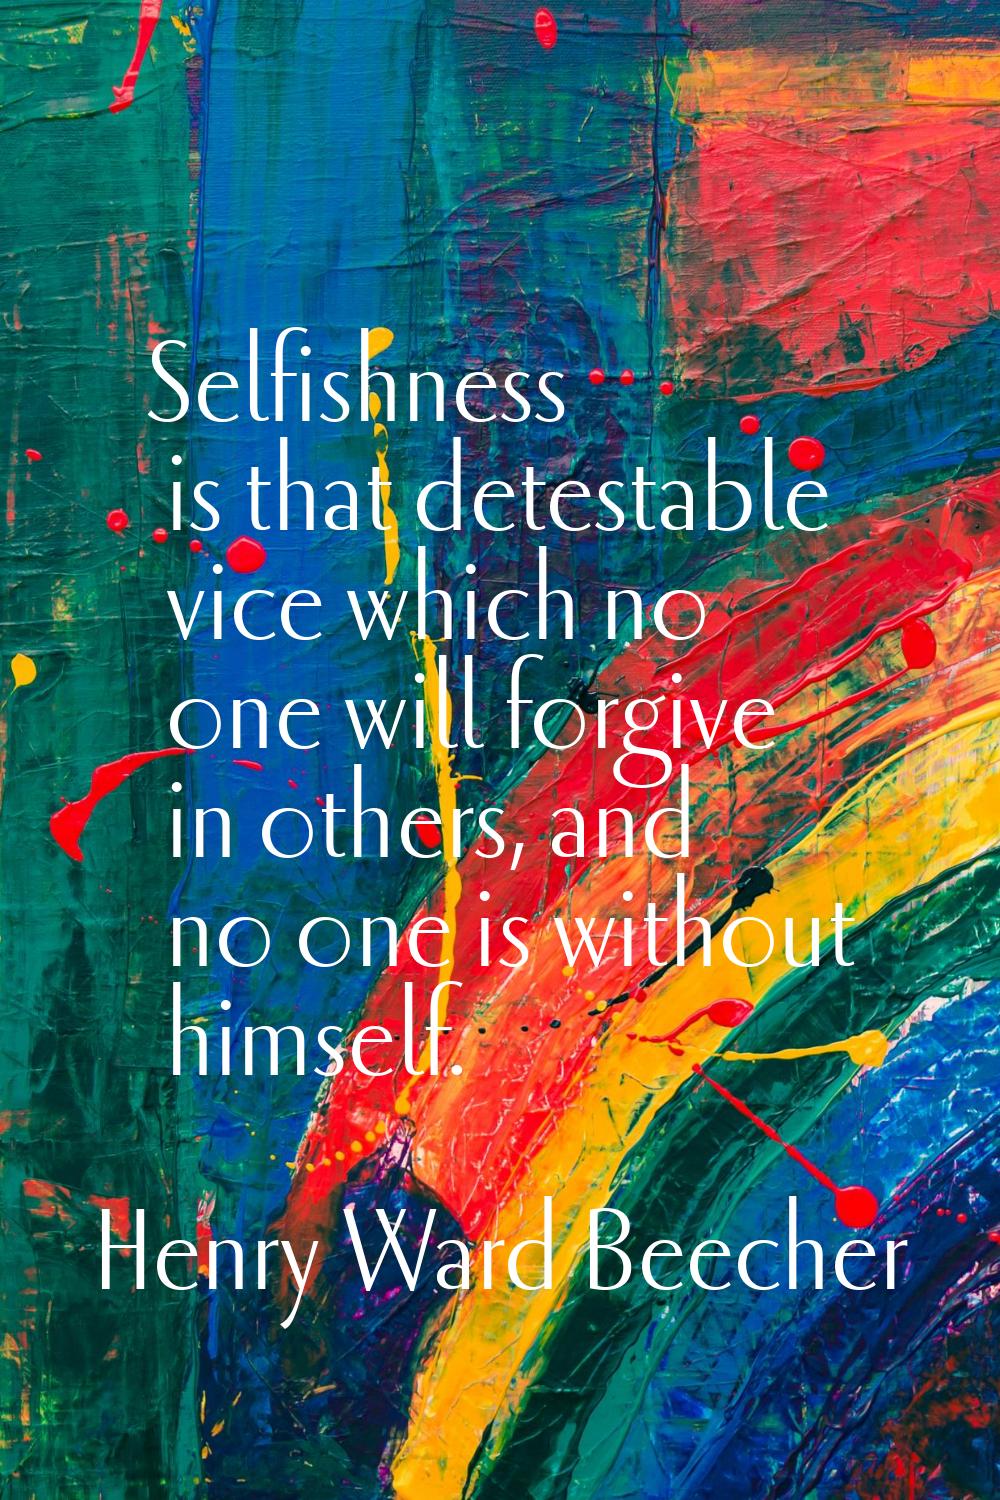 Selfishness is that detestable vice which no one will forgive in others, and no one is without hims